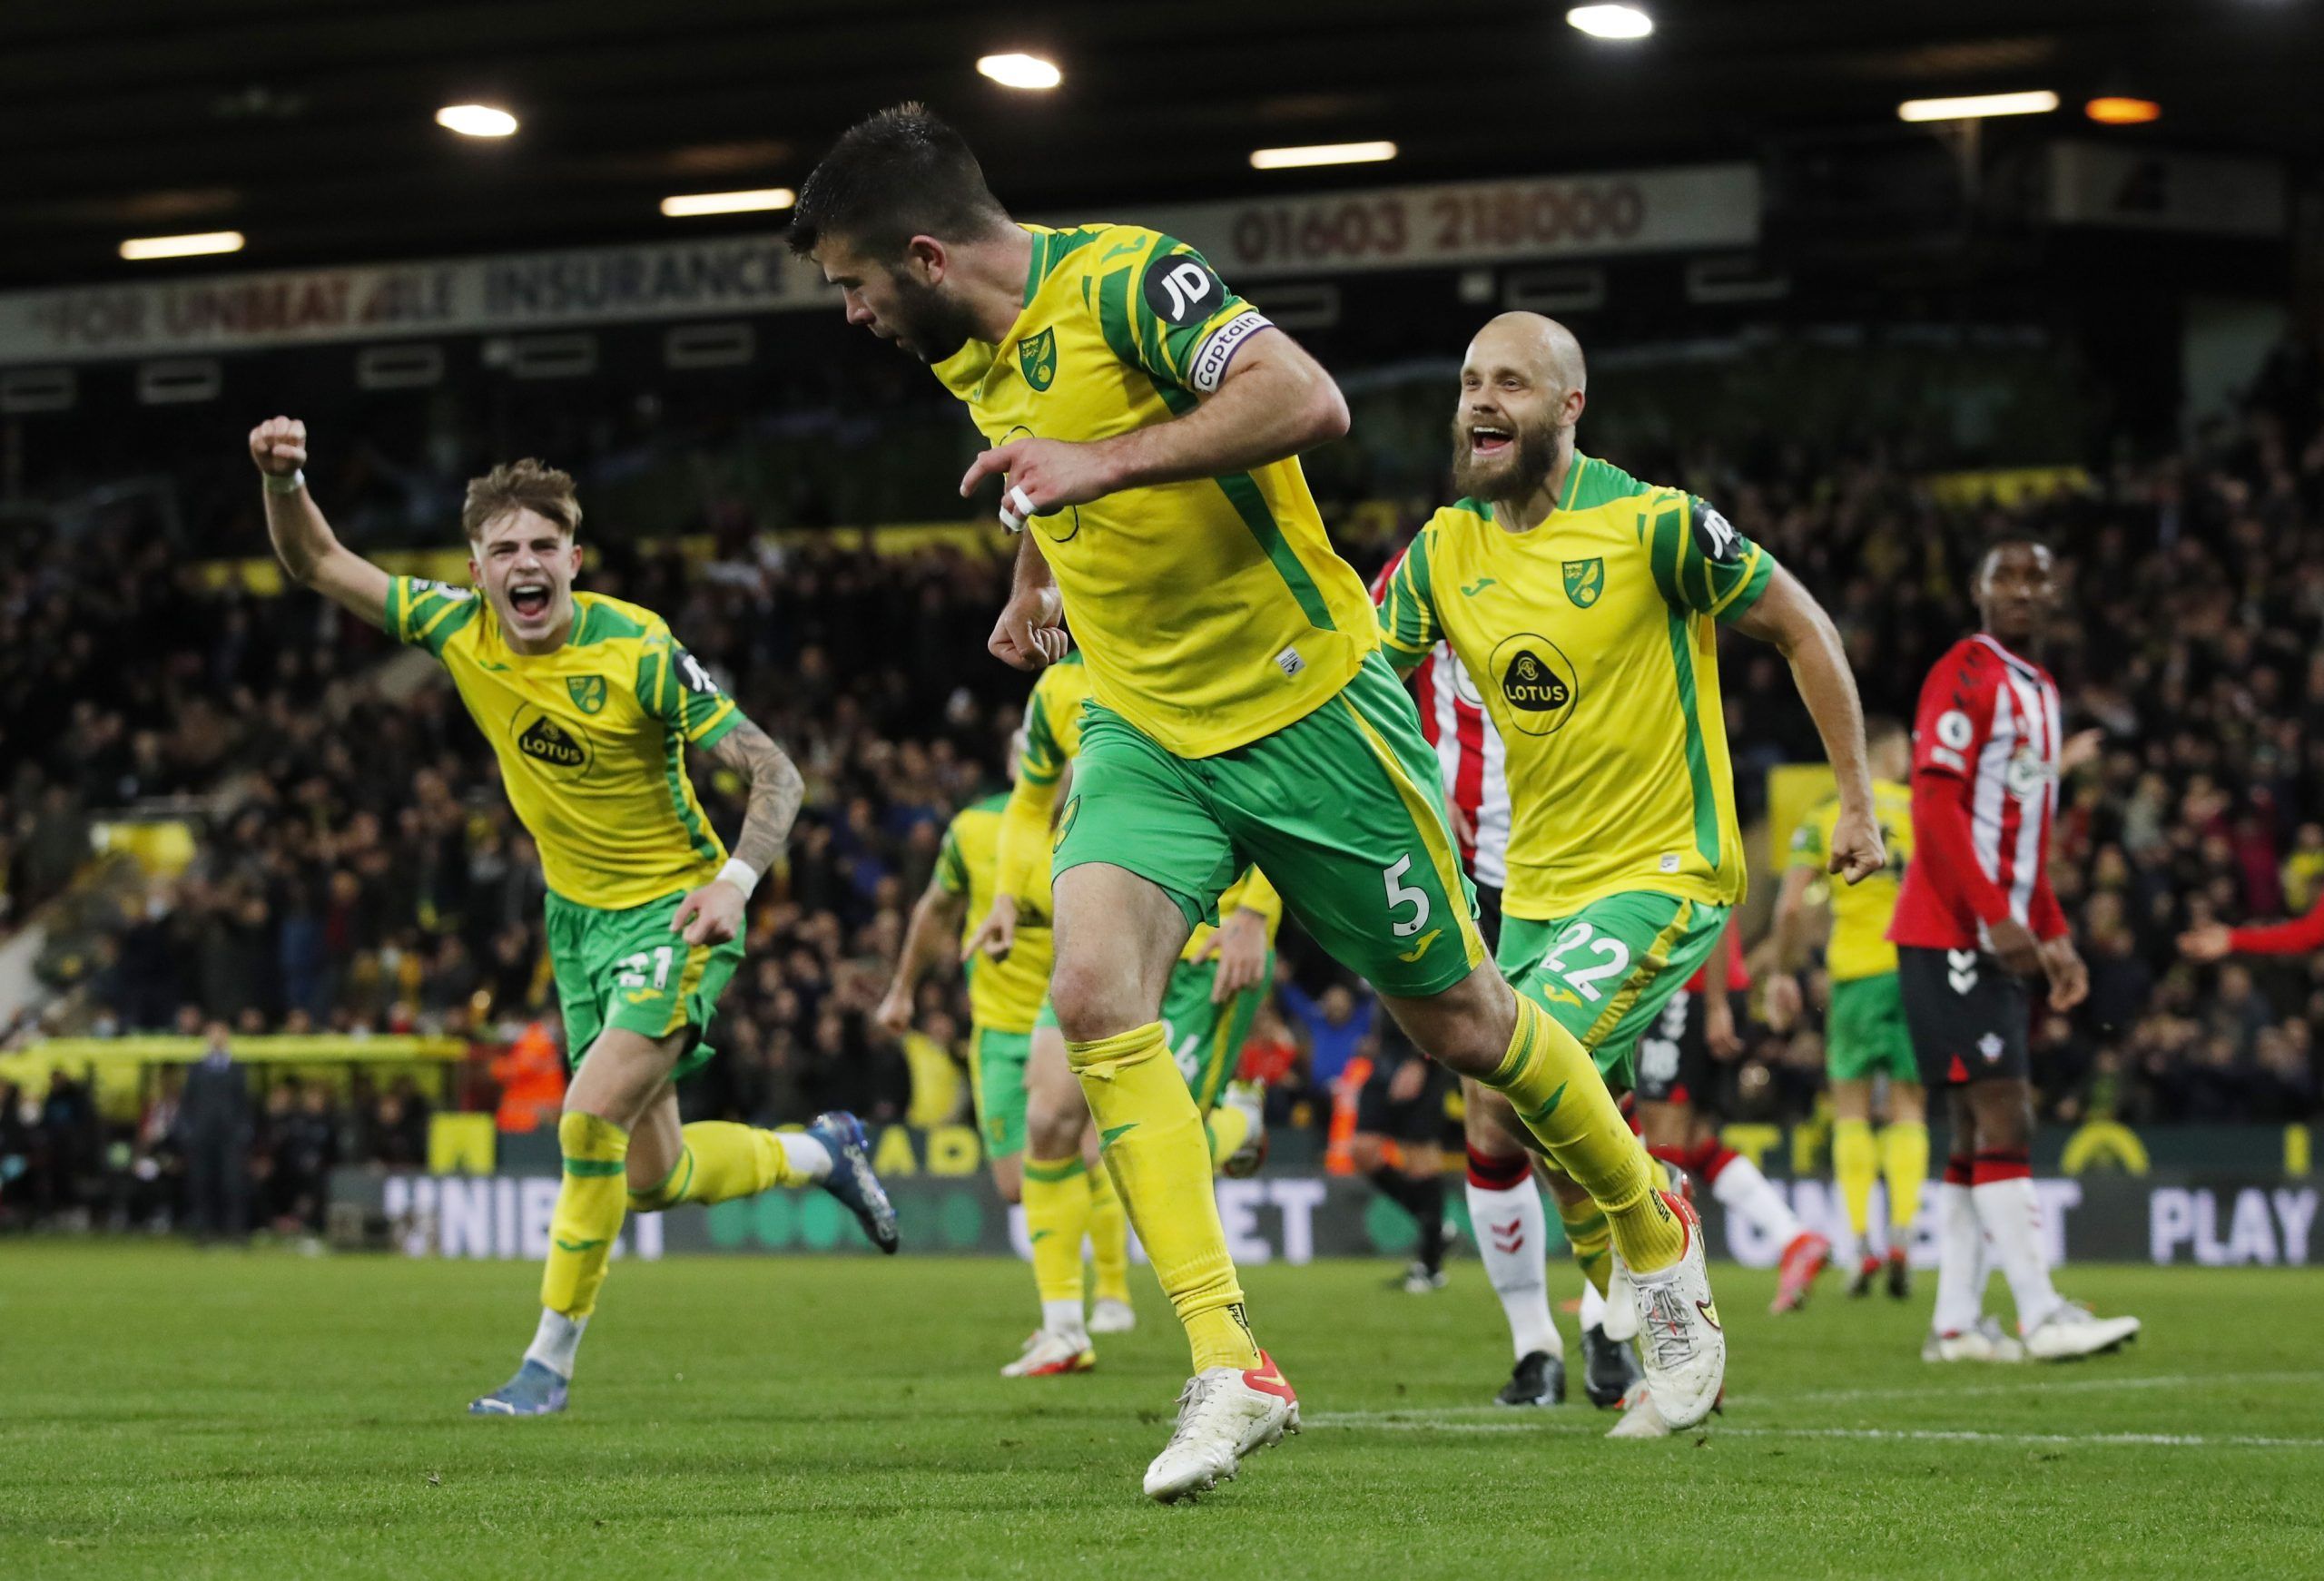 Soccer Football - Premier League - Norwich City v Southampton - Carrow Road, Norwich, Britain - November 20, 2021 Norwich City's Grant Hanley celebrates scoring their second goal with teammates Action Images via Reuters/Andrew Couldridge EDITORIAL USE ONLY. No use with unauthorized audio, video, data, fixture lists, club/league logos or 'live' services. Online in-match use limited to 75 images, no video emulation. No use in betting, games or single club /league/player publications.  Please conta